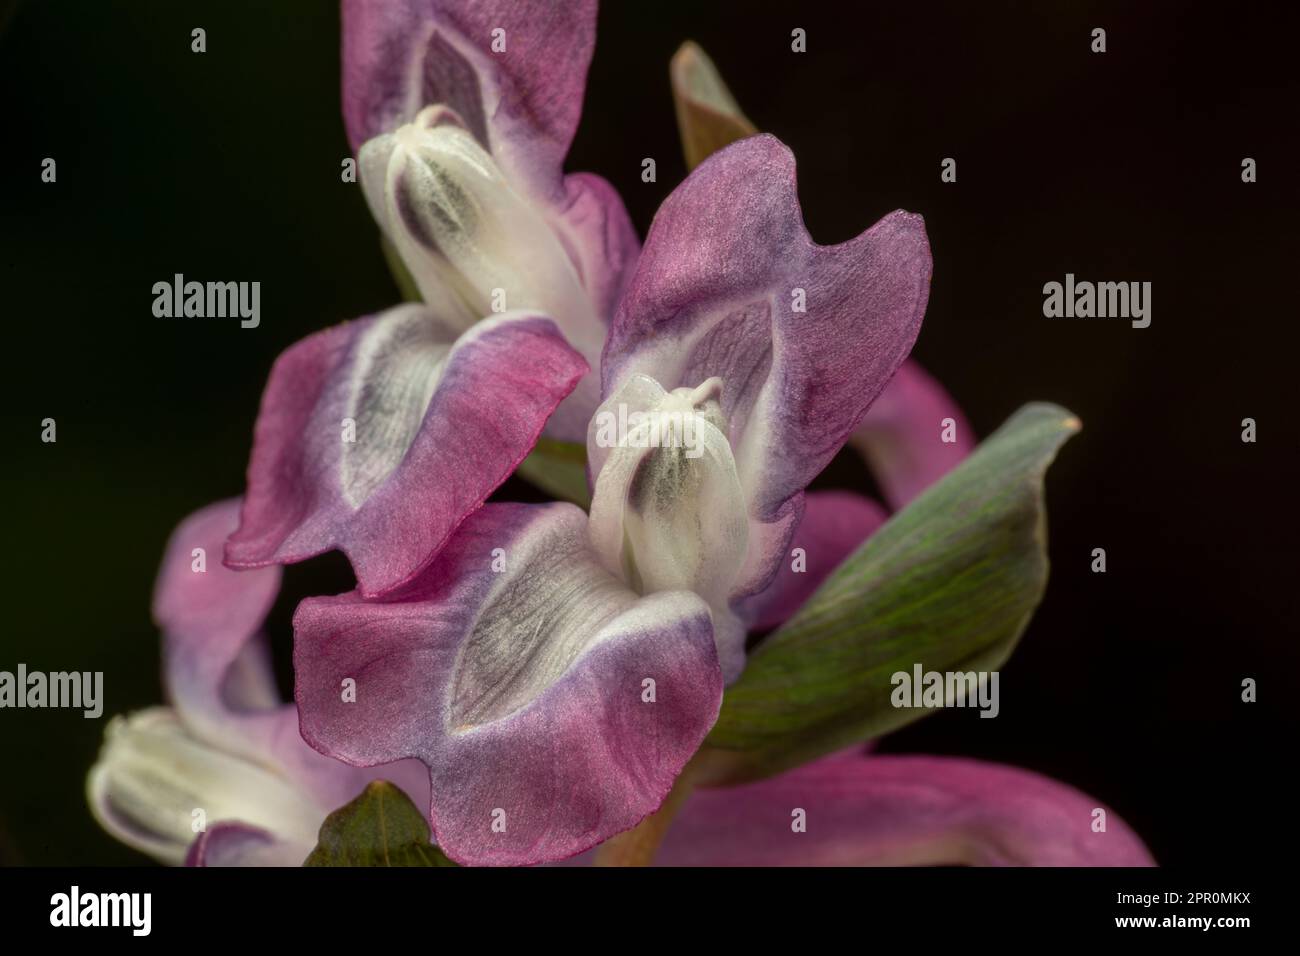 Corydalis, fumewort or bird-in-a-bush blossoms in detail Stock Photo